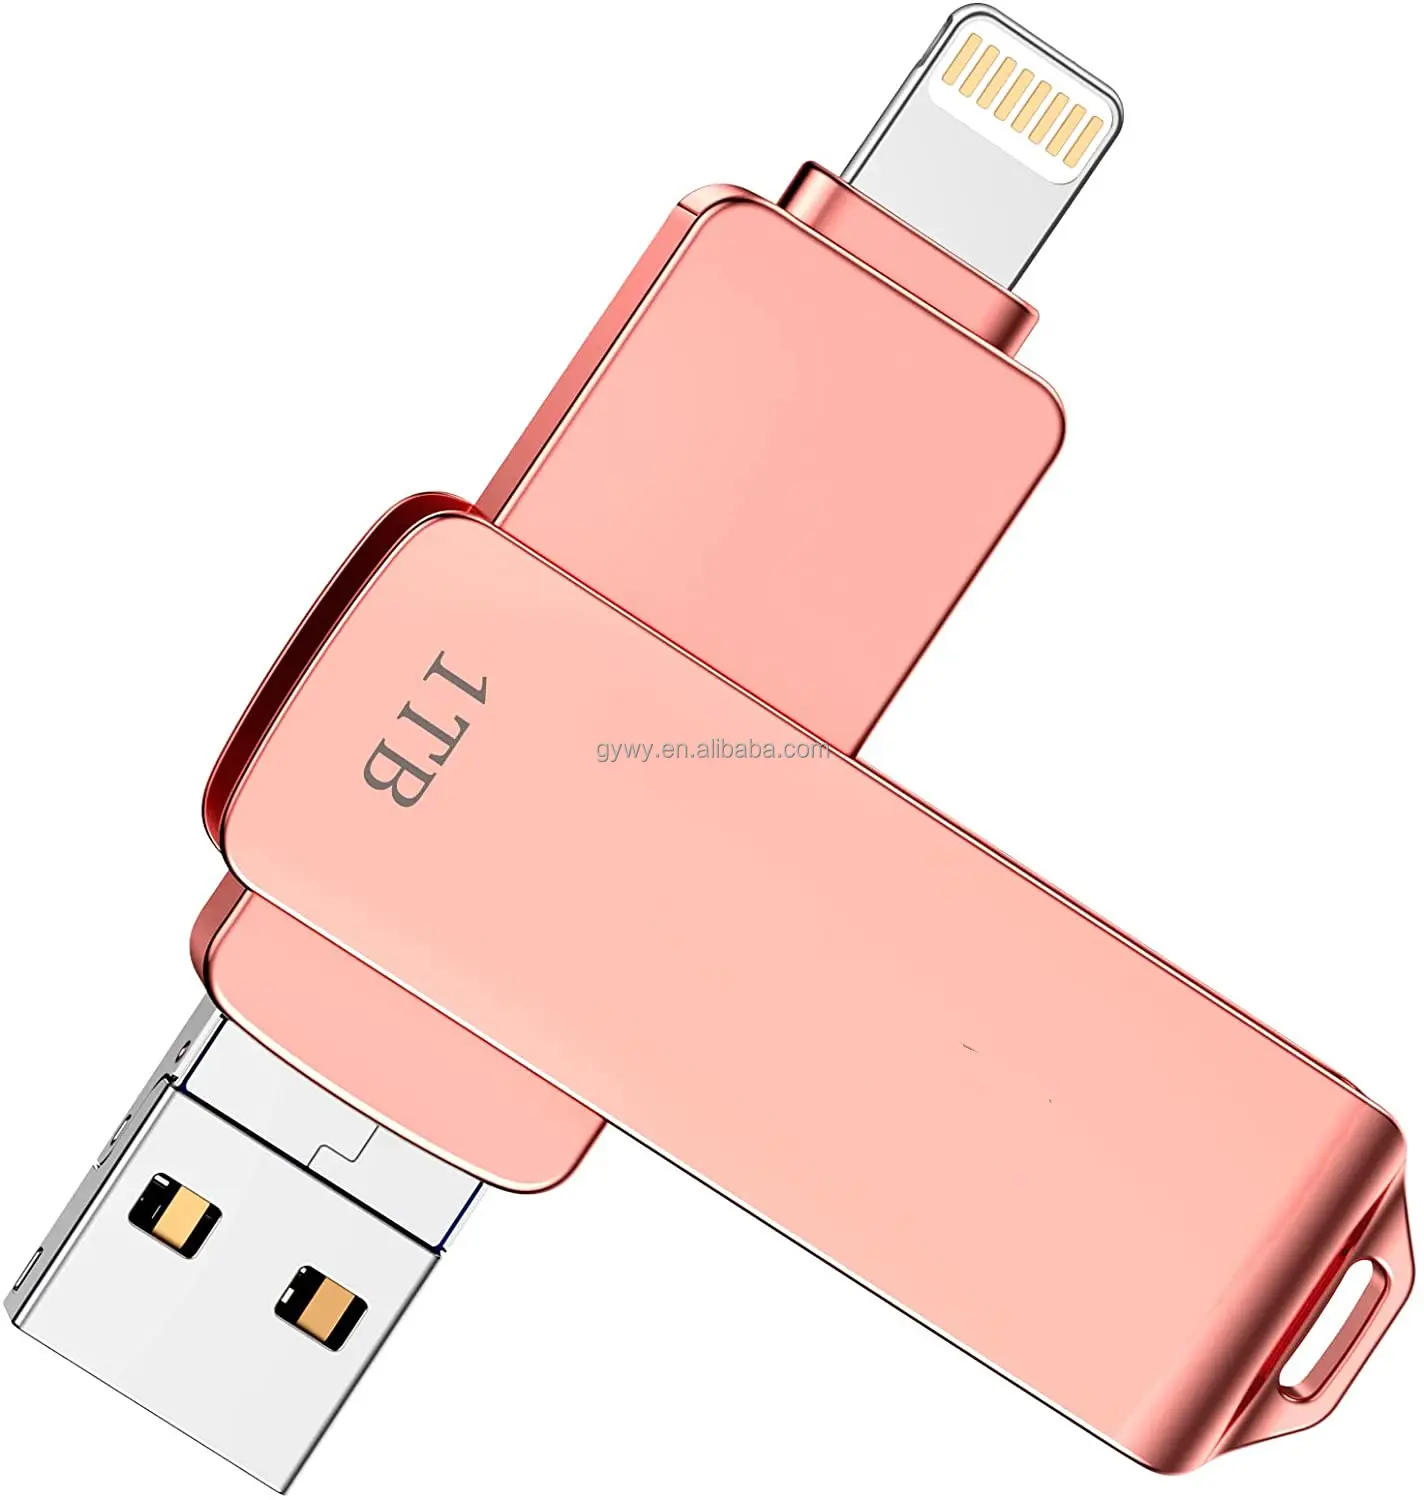 OTG Flash Drive 64G USB Memory Stick External Storage Thumb Drive Photo Stick Compatible with mobile phone, Android ,Computer